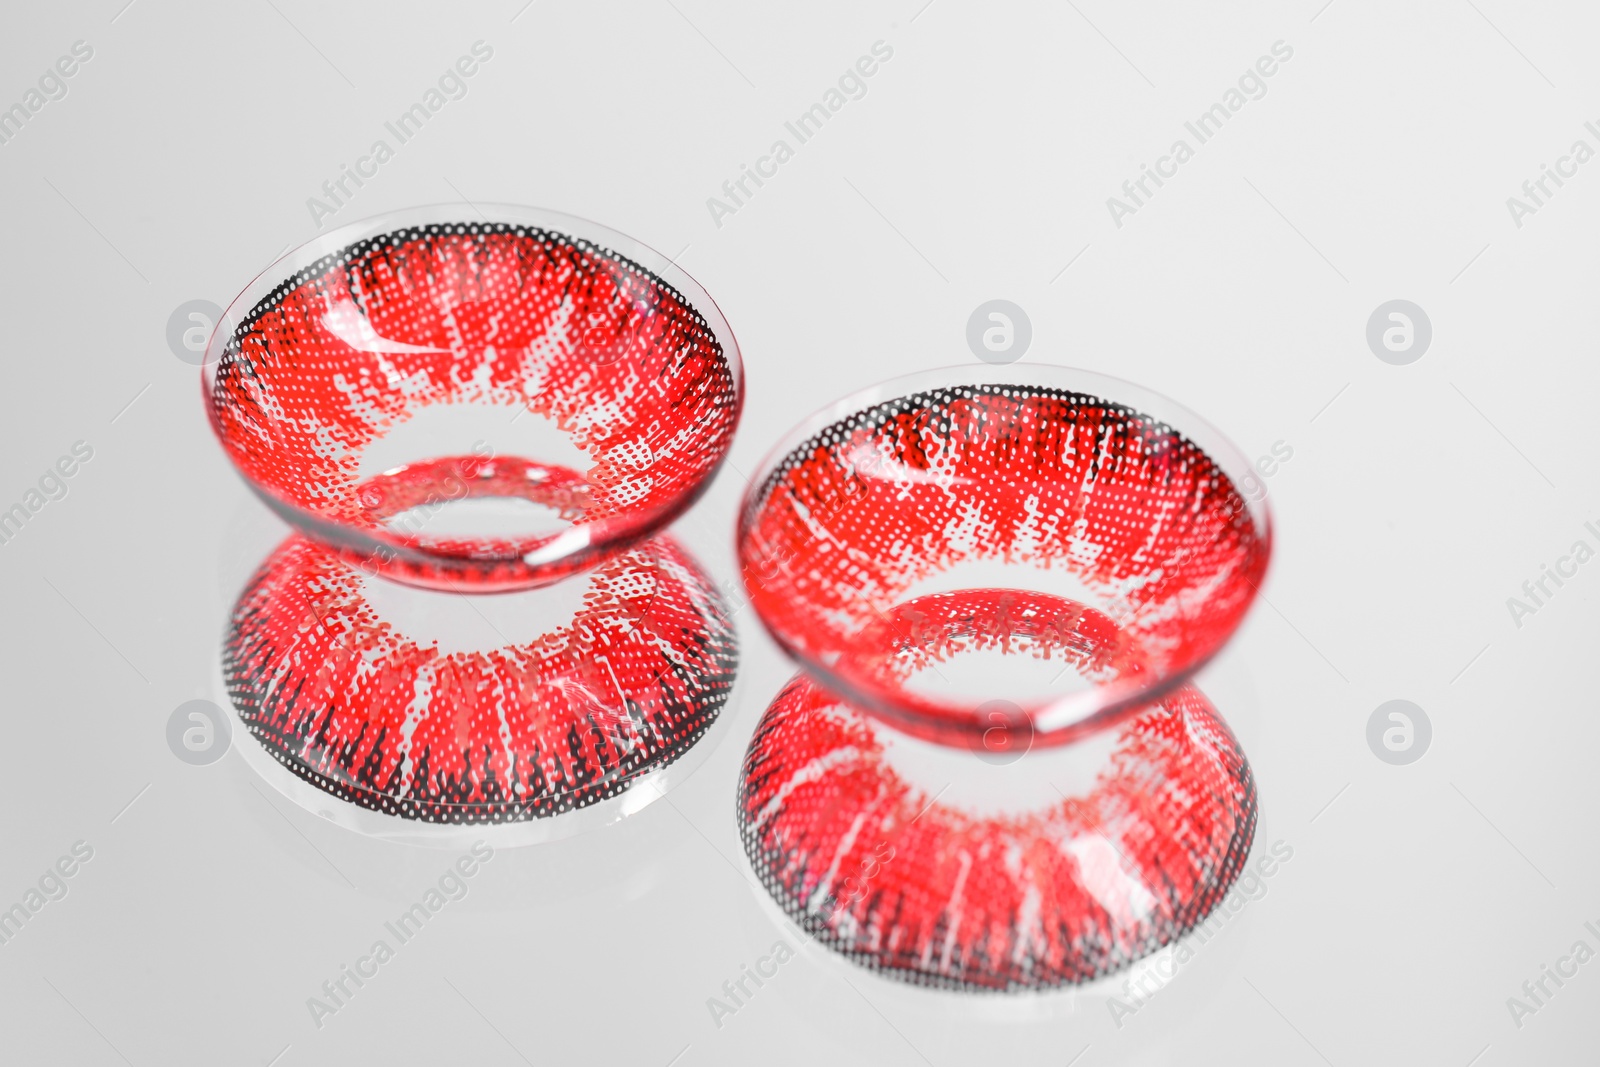 Photo of Two red contact lenses on mirror surface